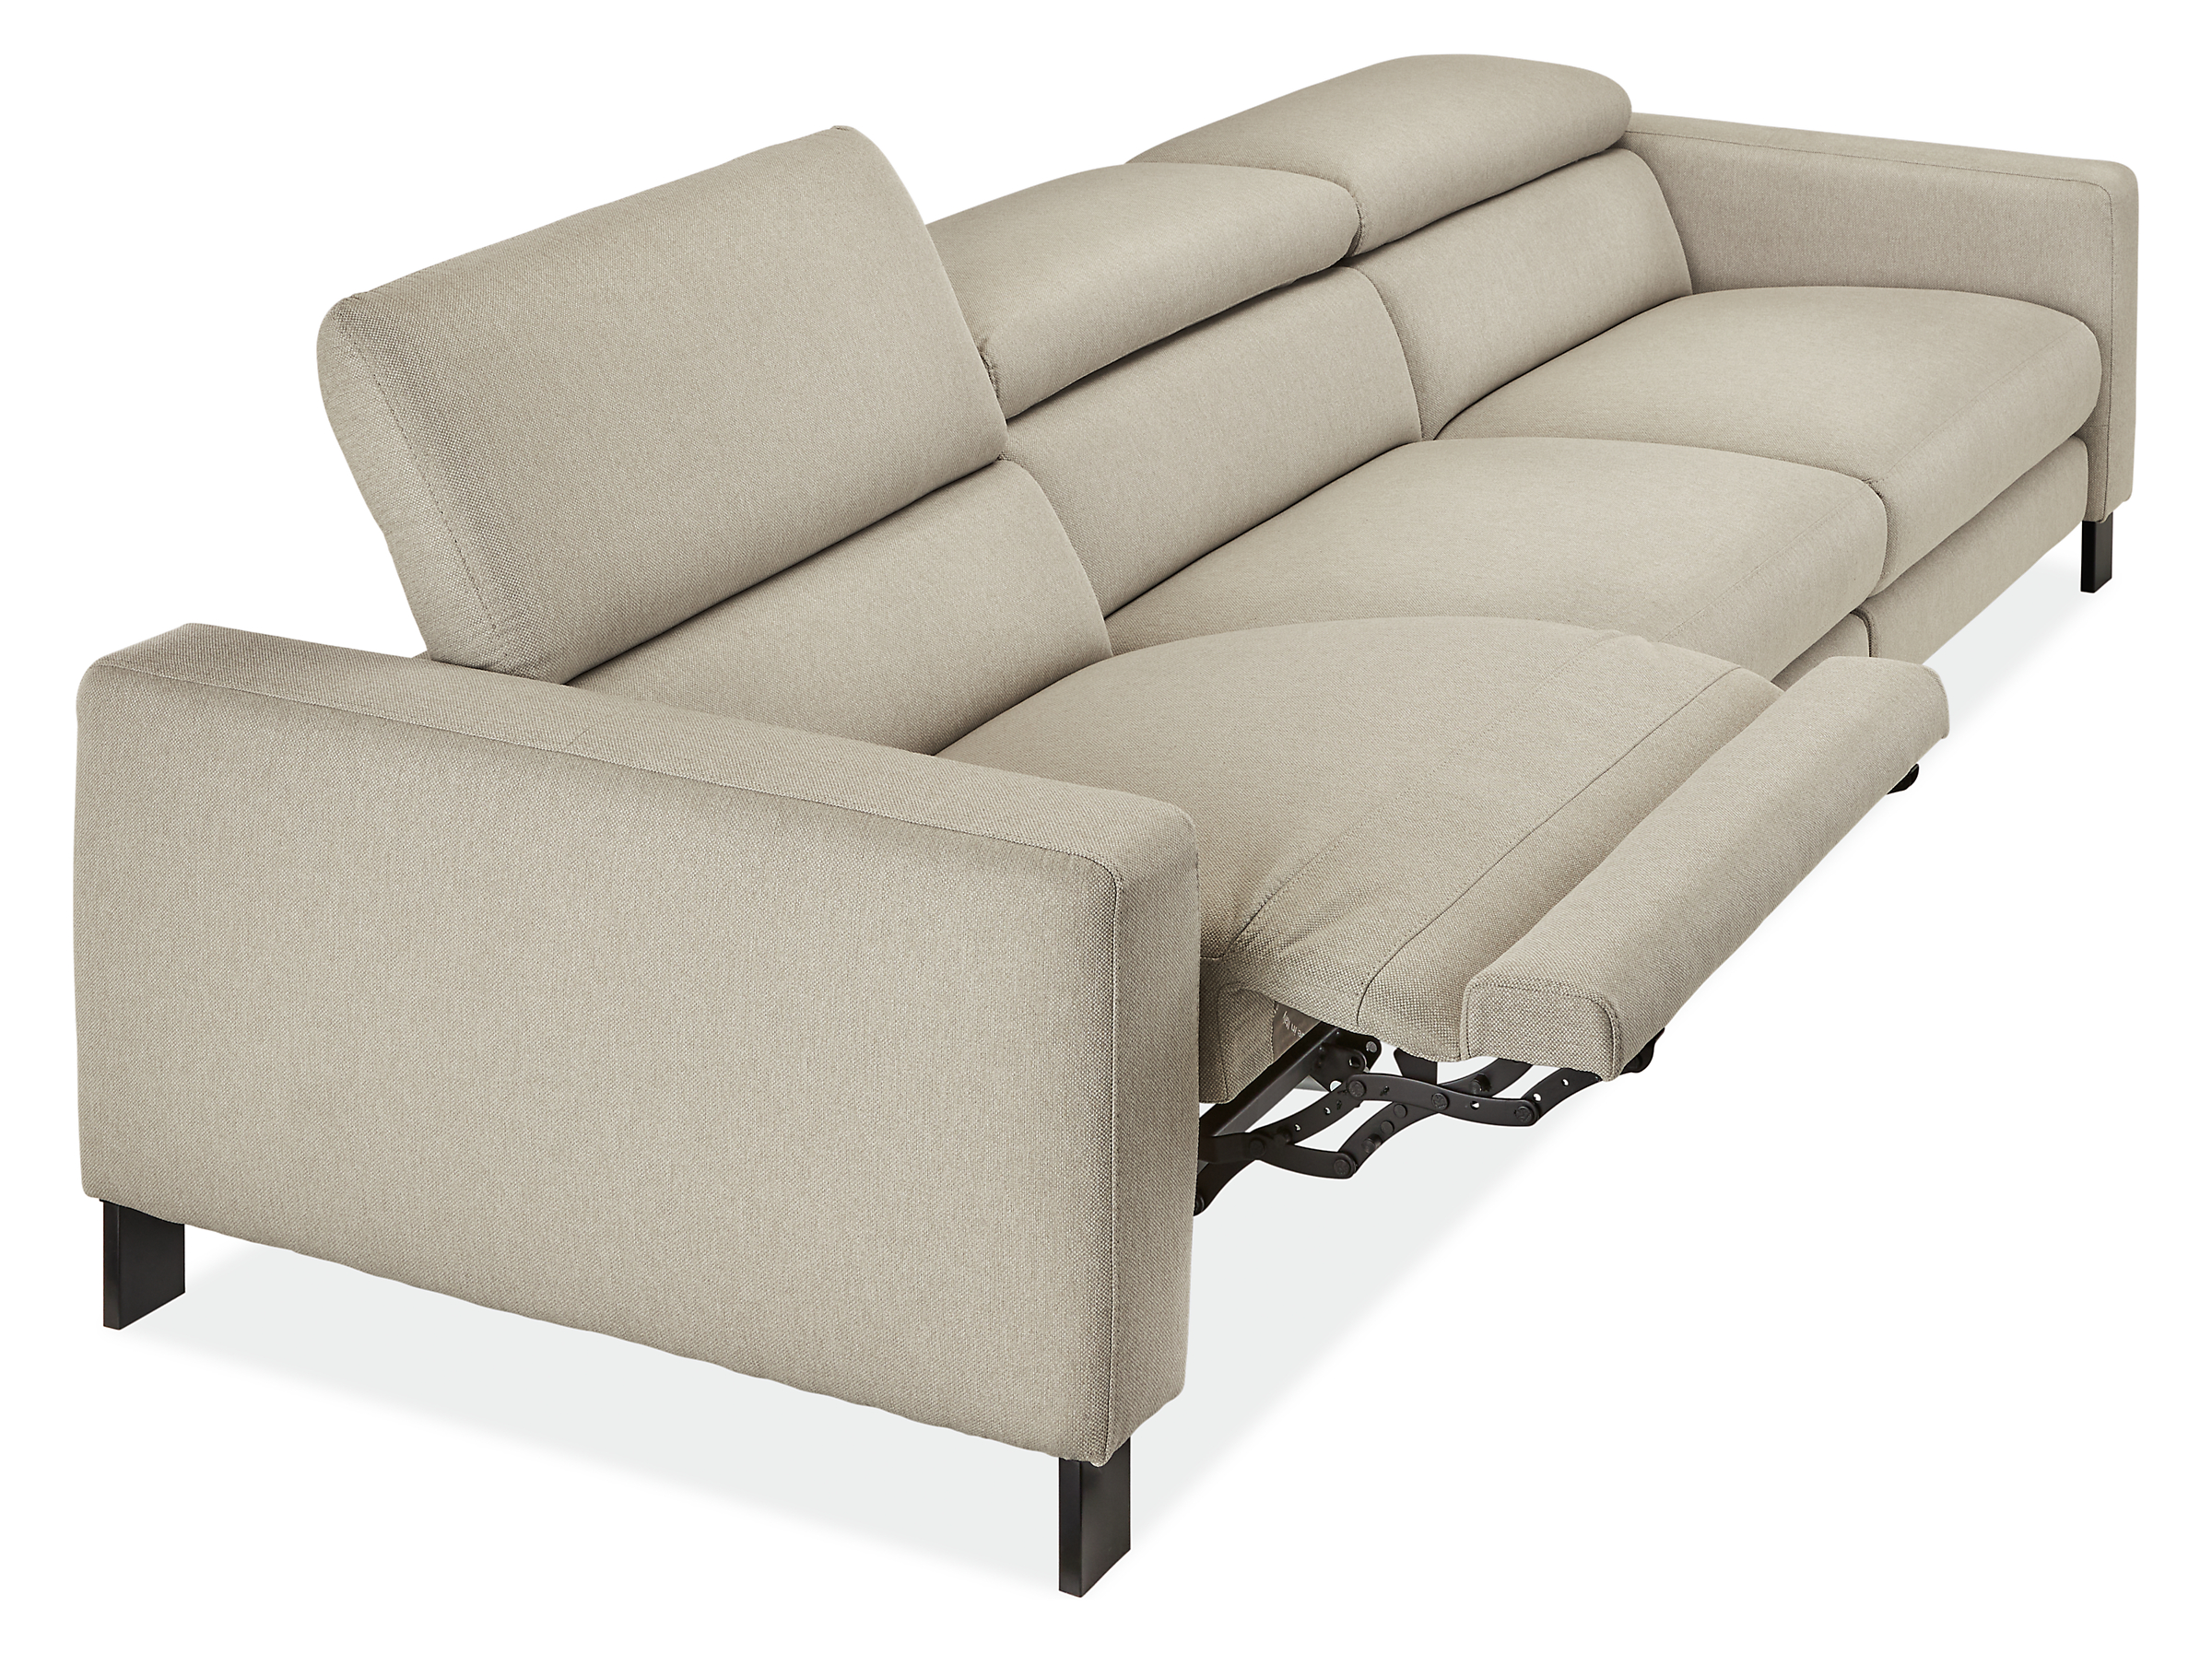 detail of gray Elio sofa with 1 headrest and 1 footrest extended.